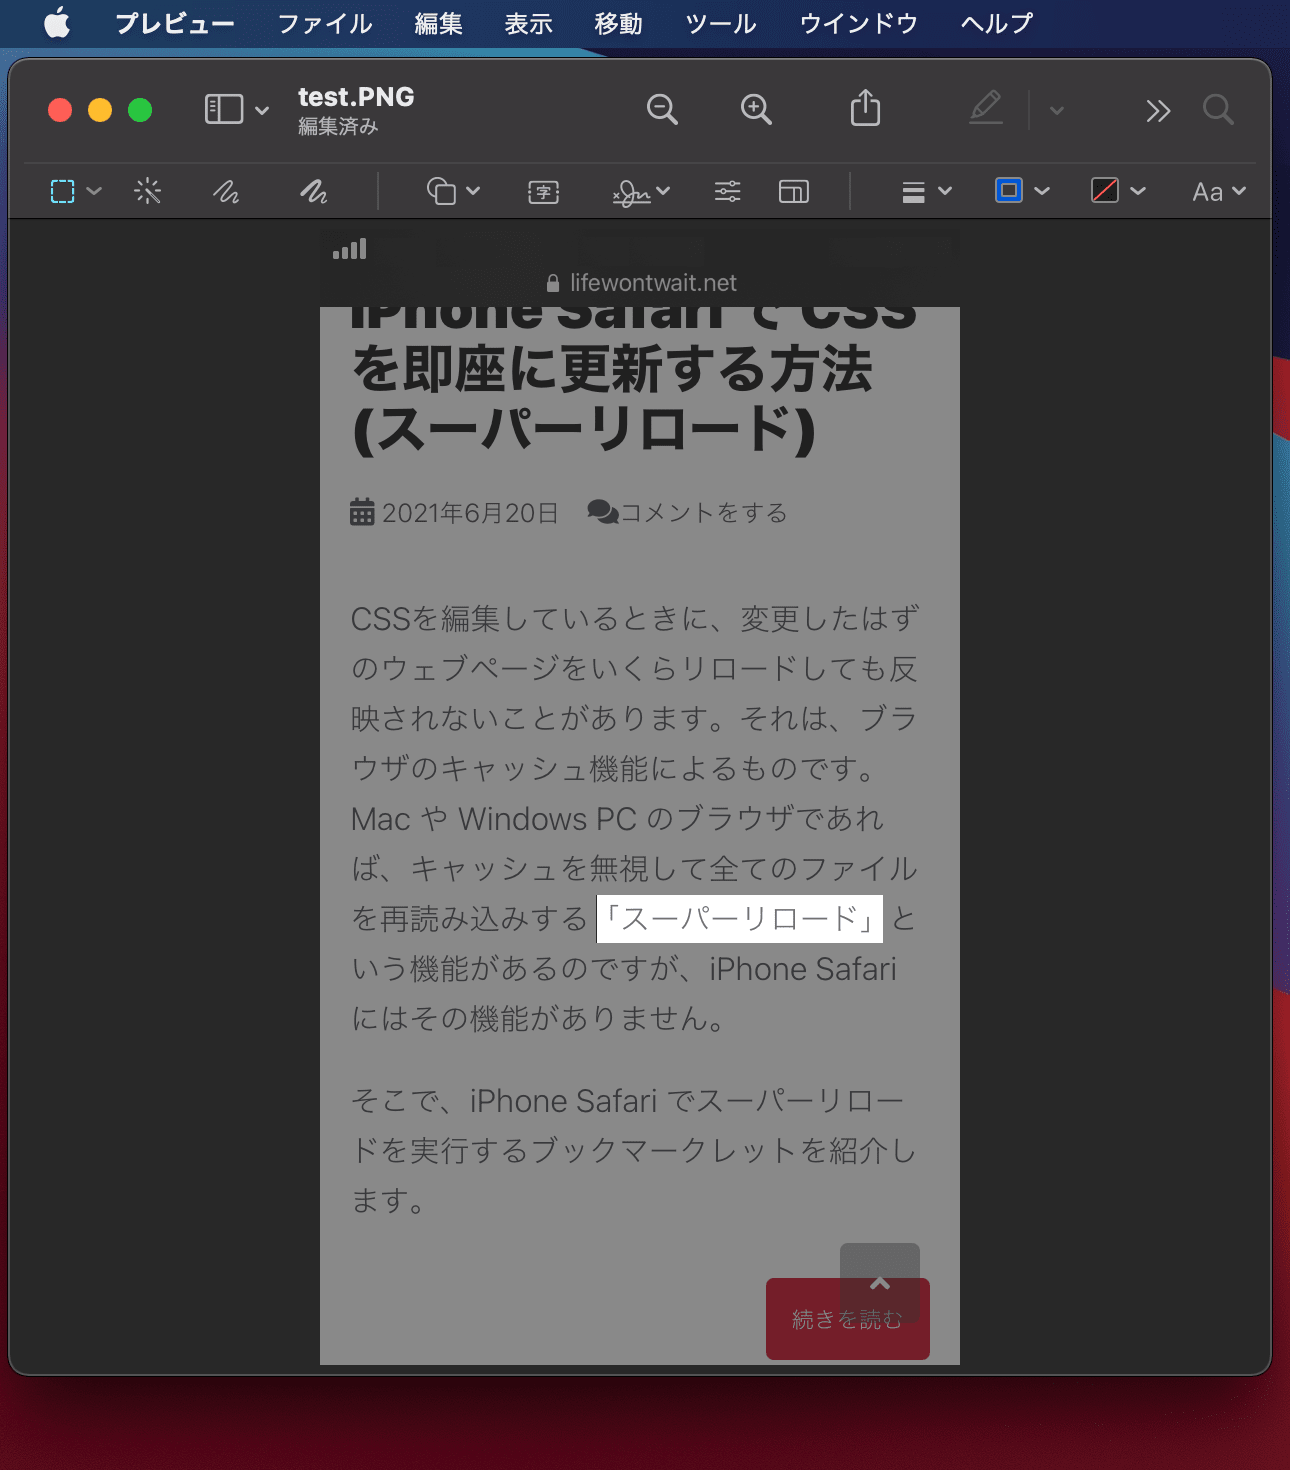 highlight-part-of-an-image-in-the-mac-preview-app_08